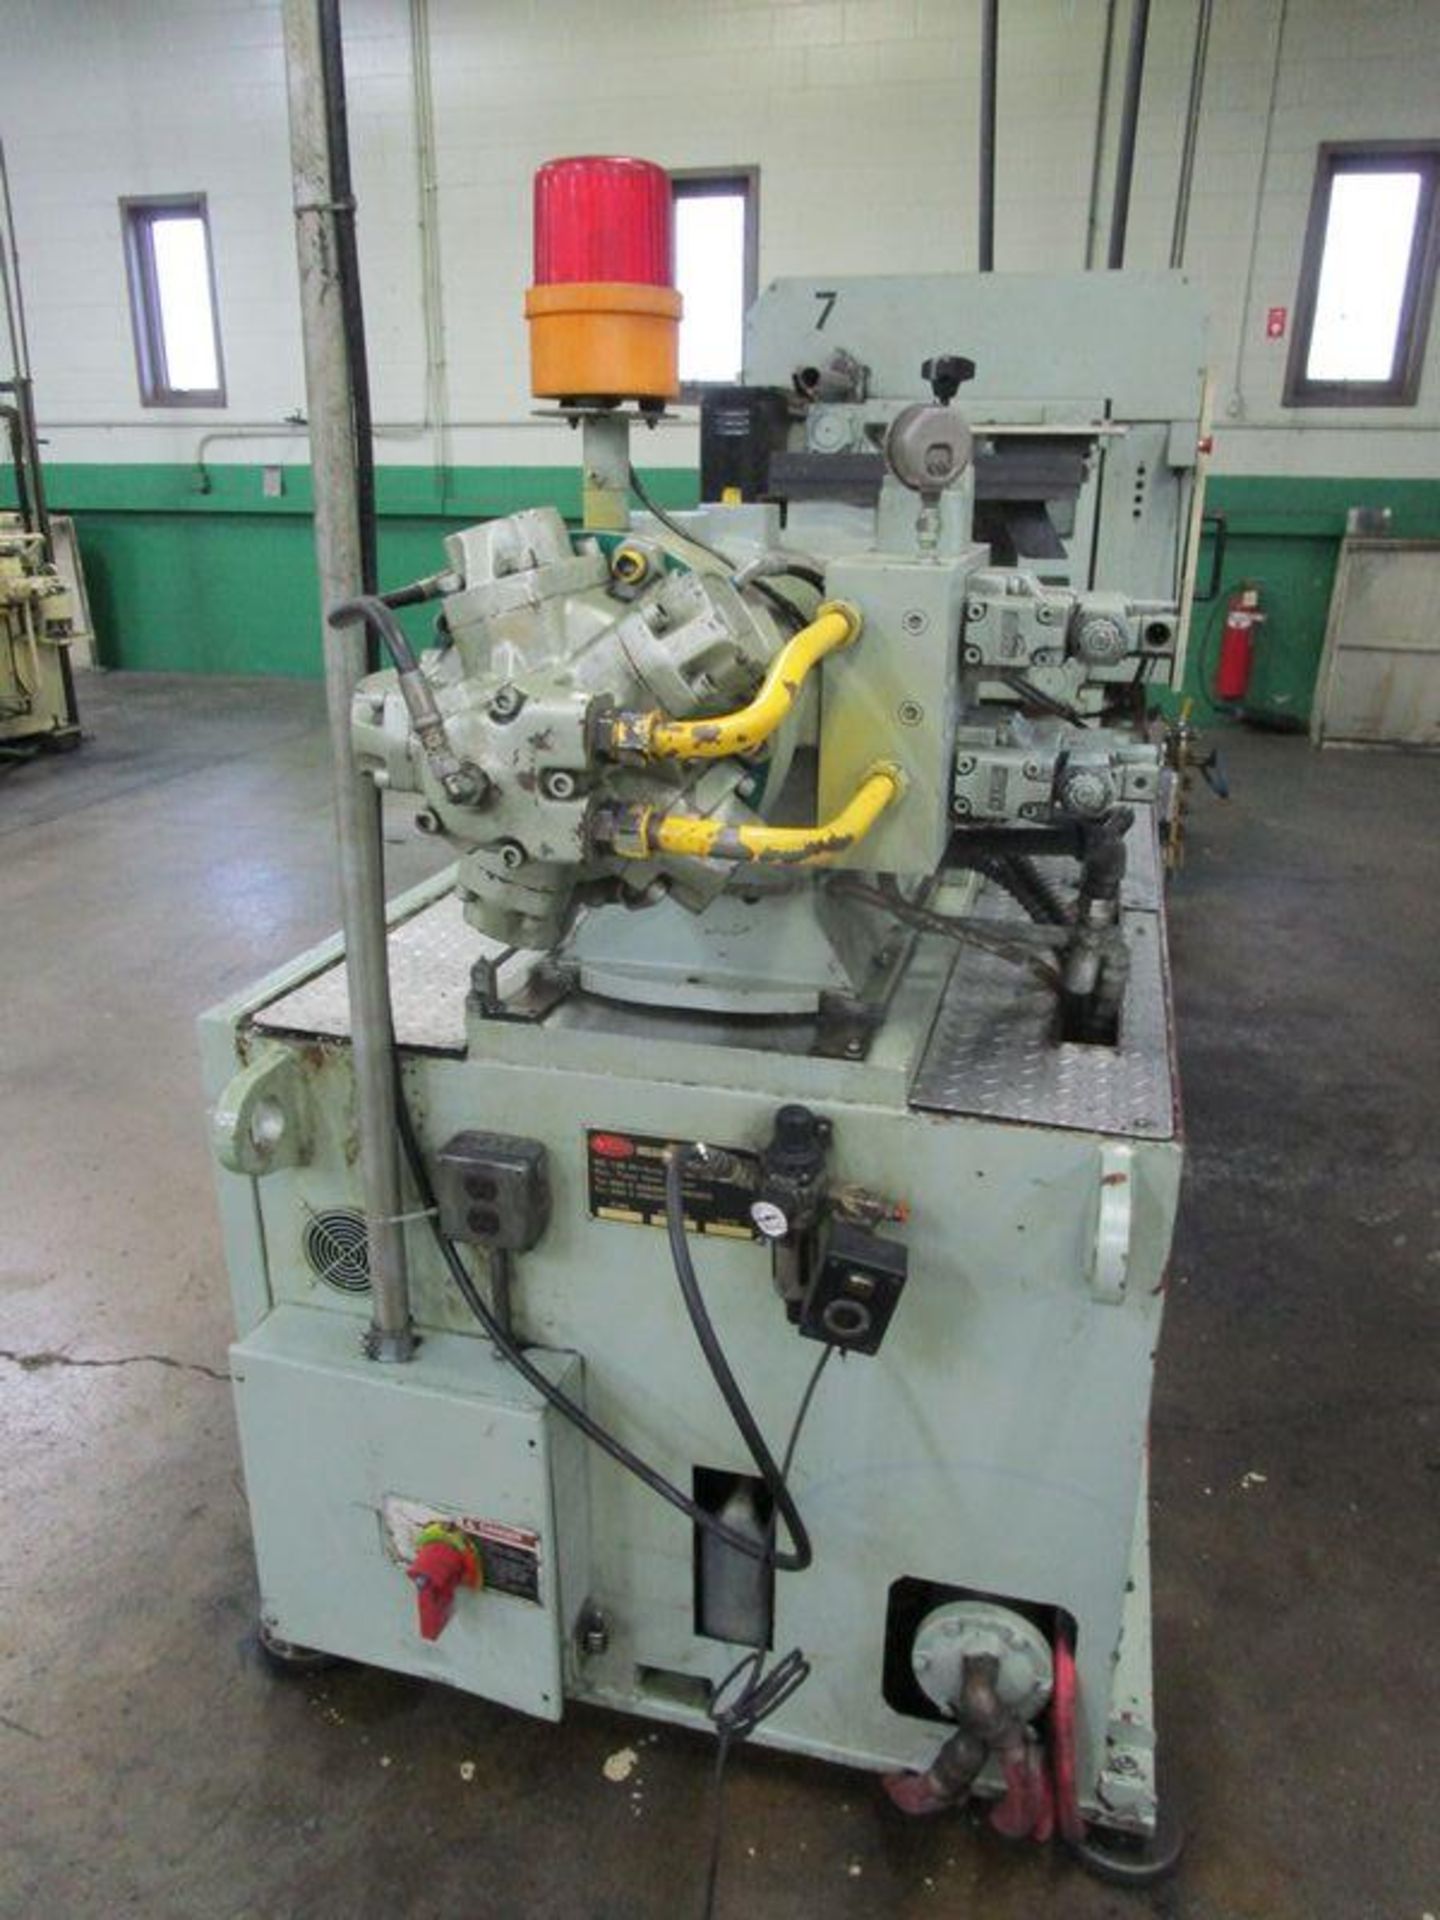 Nissin NC-145-FX2C 145-Ton Plastic Injection Molding Machine, S/N 95-145-13, 1995 - Image 9 of 9